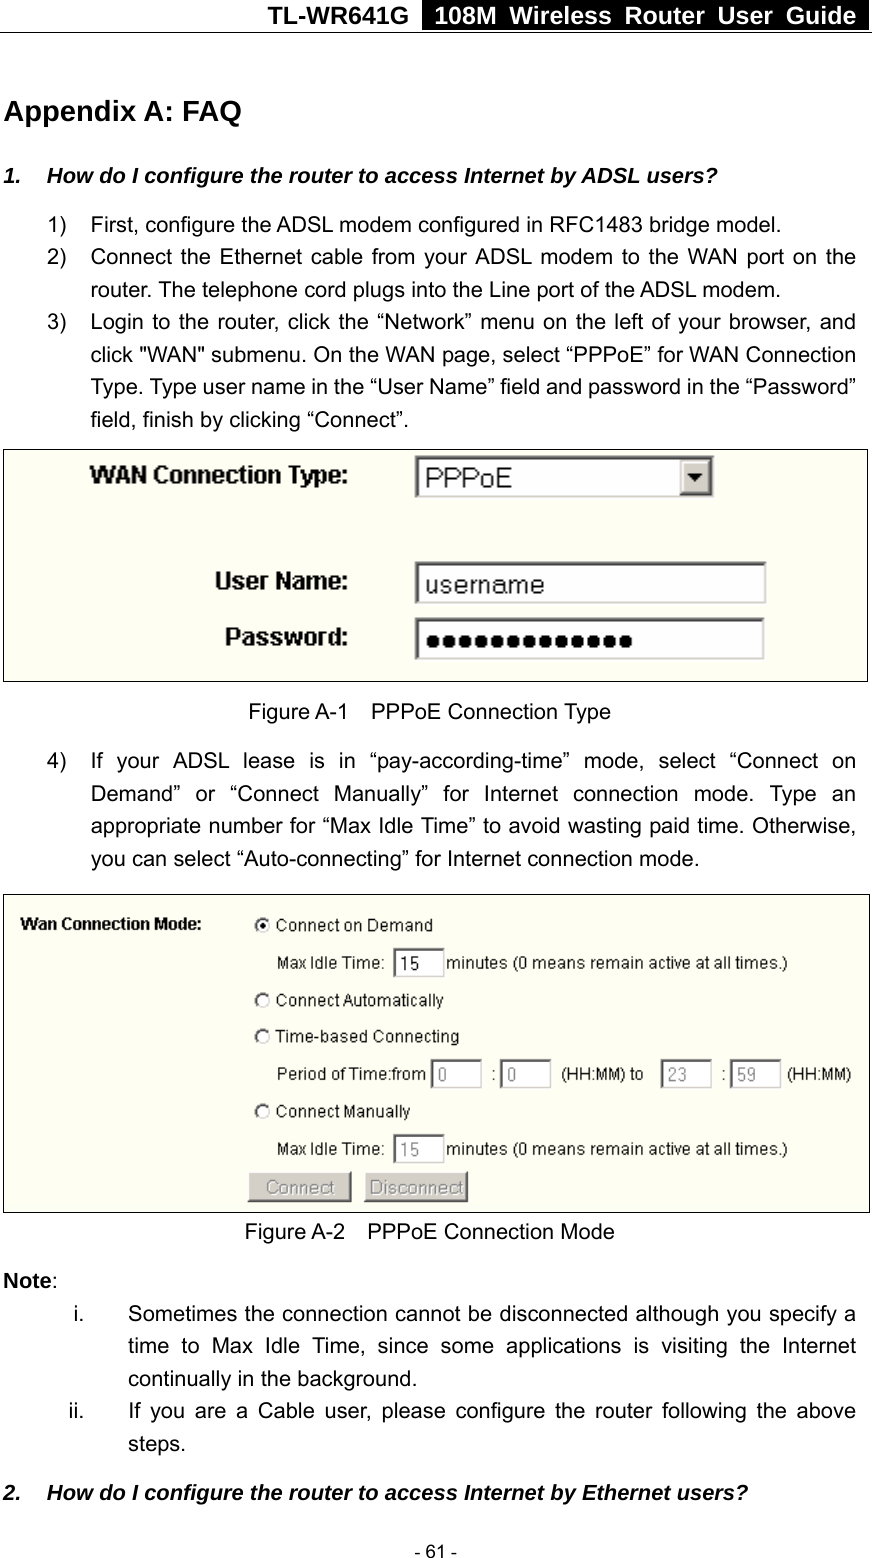 TL-WR641G   108M Wireless Router User Guide  Appendix A: FAQ 1.  How do I configure the router to access Internet by ADSL users? 1)  First, configure the ADSL modem configured in RFC1483 bridge model. 2)  Connect the Ethernet cable from your ADSL modem to the WAN port on the router. The telephone cord plugs into the Line port of the ADSL modem. 3)  Login to the router, click the “Network” menu on the left of your browser, and click &quot;WAN&quot; submenu. On the WAN page, select “PPPoE” for WAN Connection Type. Type user name in the “User Name” field and password in the “Password” field, finish by clicking “Connect”.  Figure A-1  PPPoE Connection Type 4)  If your ADSL lease is in “pay-according-time” mode, select “Connect on Demand” or “Connect Manually” for Internet connection mode. Type an appropriate number for “Max Idle Time” to avoid wasting paid time. Otherwise, you can select “Auto-connecting” for Internet connection mode.  Figure A-2  PPPoE Connection Mode Note:  i.  Sometimes the connection cannot be disconnected although you specify a time to Max Idle Time, since some applications is visiting the Internet continually in the background. ii.  If you are a Cable user, please configure the router following the above steps. 2.  How do I configure the router to access Internet by Ethernet users?  - 61 - 